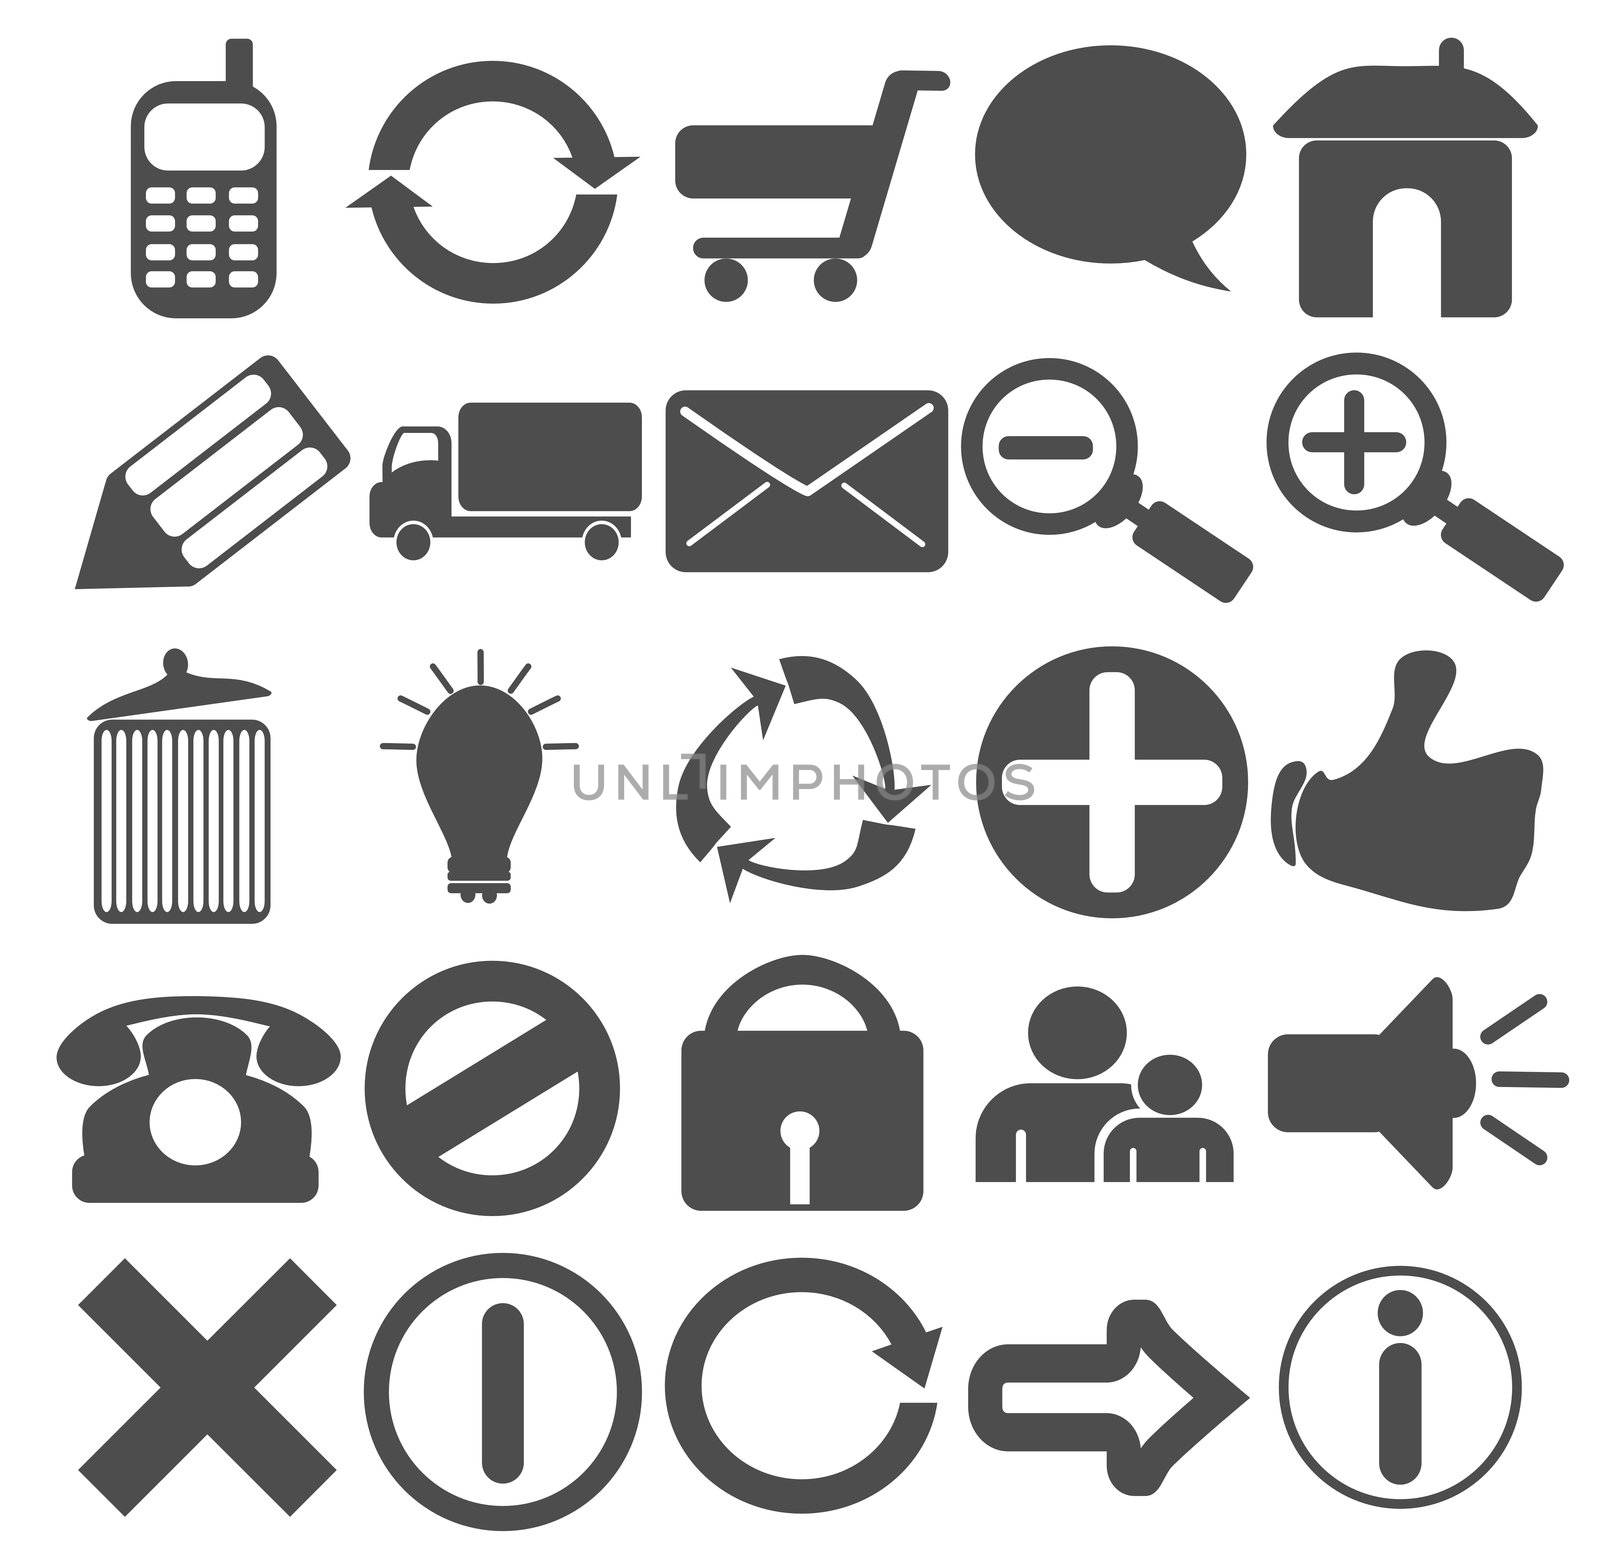 A collection of 25 web icons in plain grey color